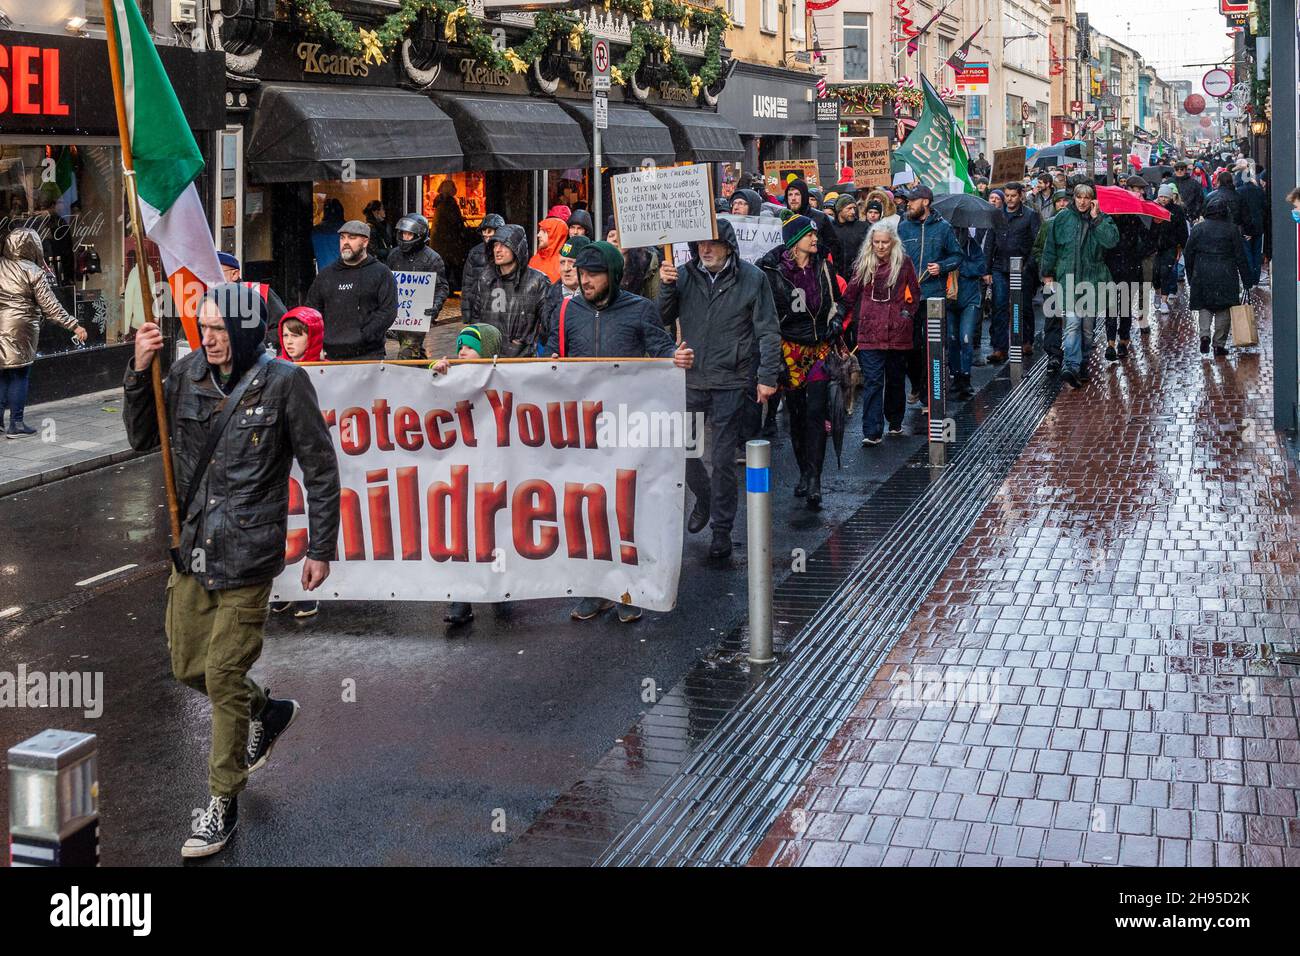 Cork, Ireland. 4th Dec, 2021. Around 500 people held a protest in Cork city today against lockdown; vaccinations for children; vaccine passports and face masks. The protestors marched around Cork city centre chanting and waving signs. It comes as the government has imposed restrictions on hospitality and household mixing until 9th January. Credit: AG News/Alamy Live News Stock Photo